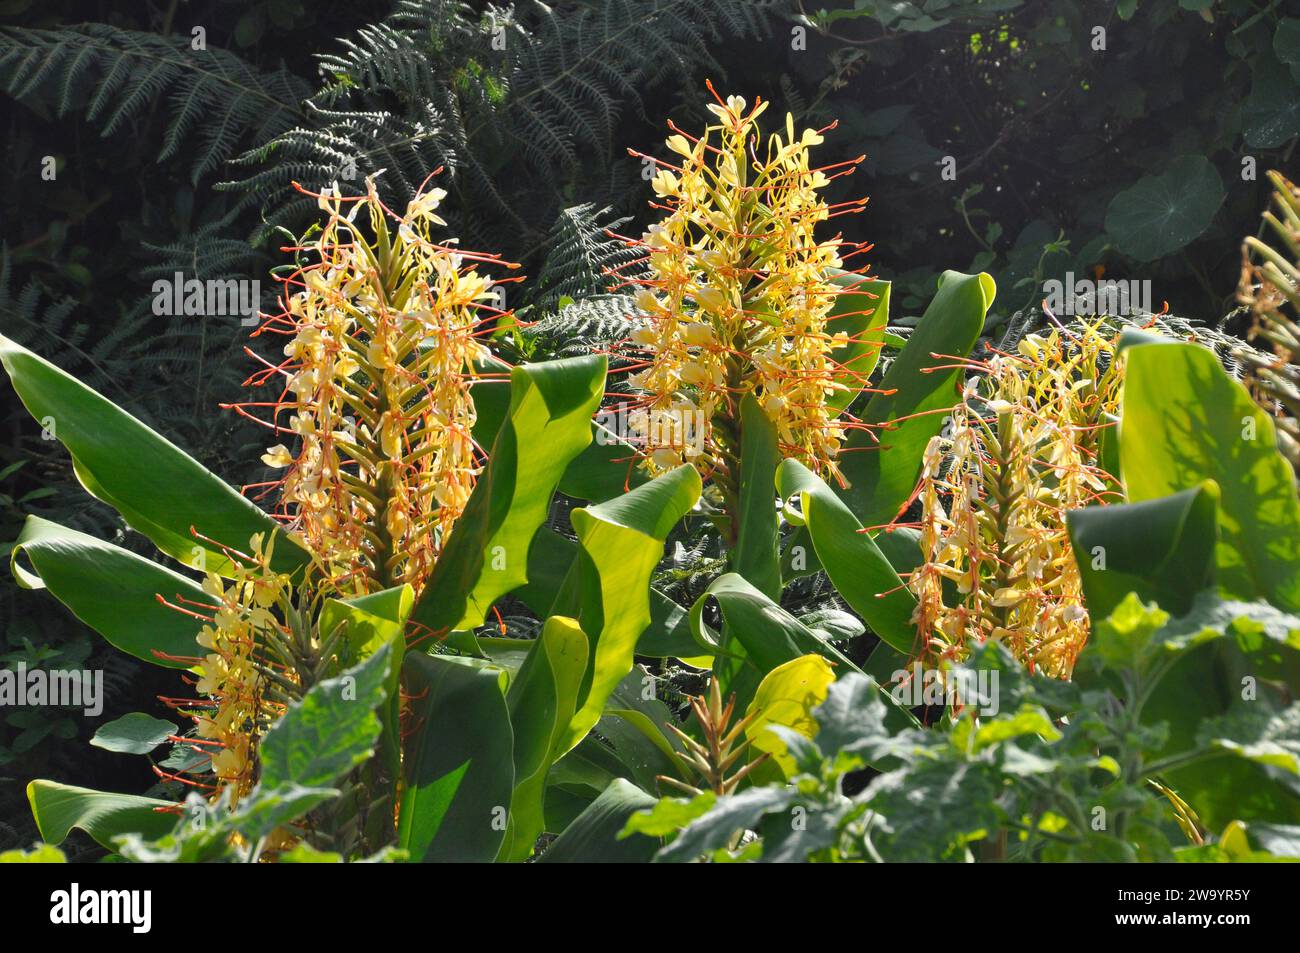 Flower spikes of the exotic Kahili ginger, Hedychium gardnerianum, growing in a field on St Martin an island in the Isles of Scilly archipelago of the Stock Photo